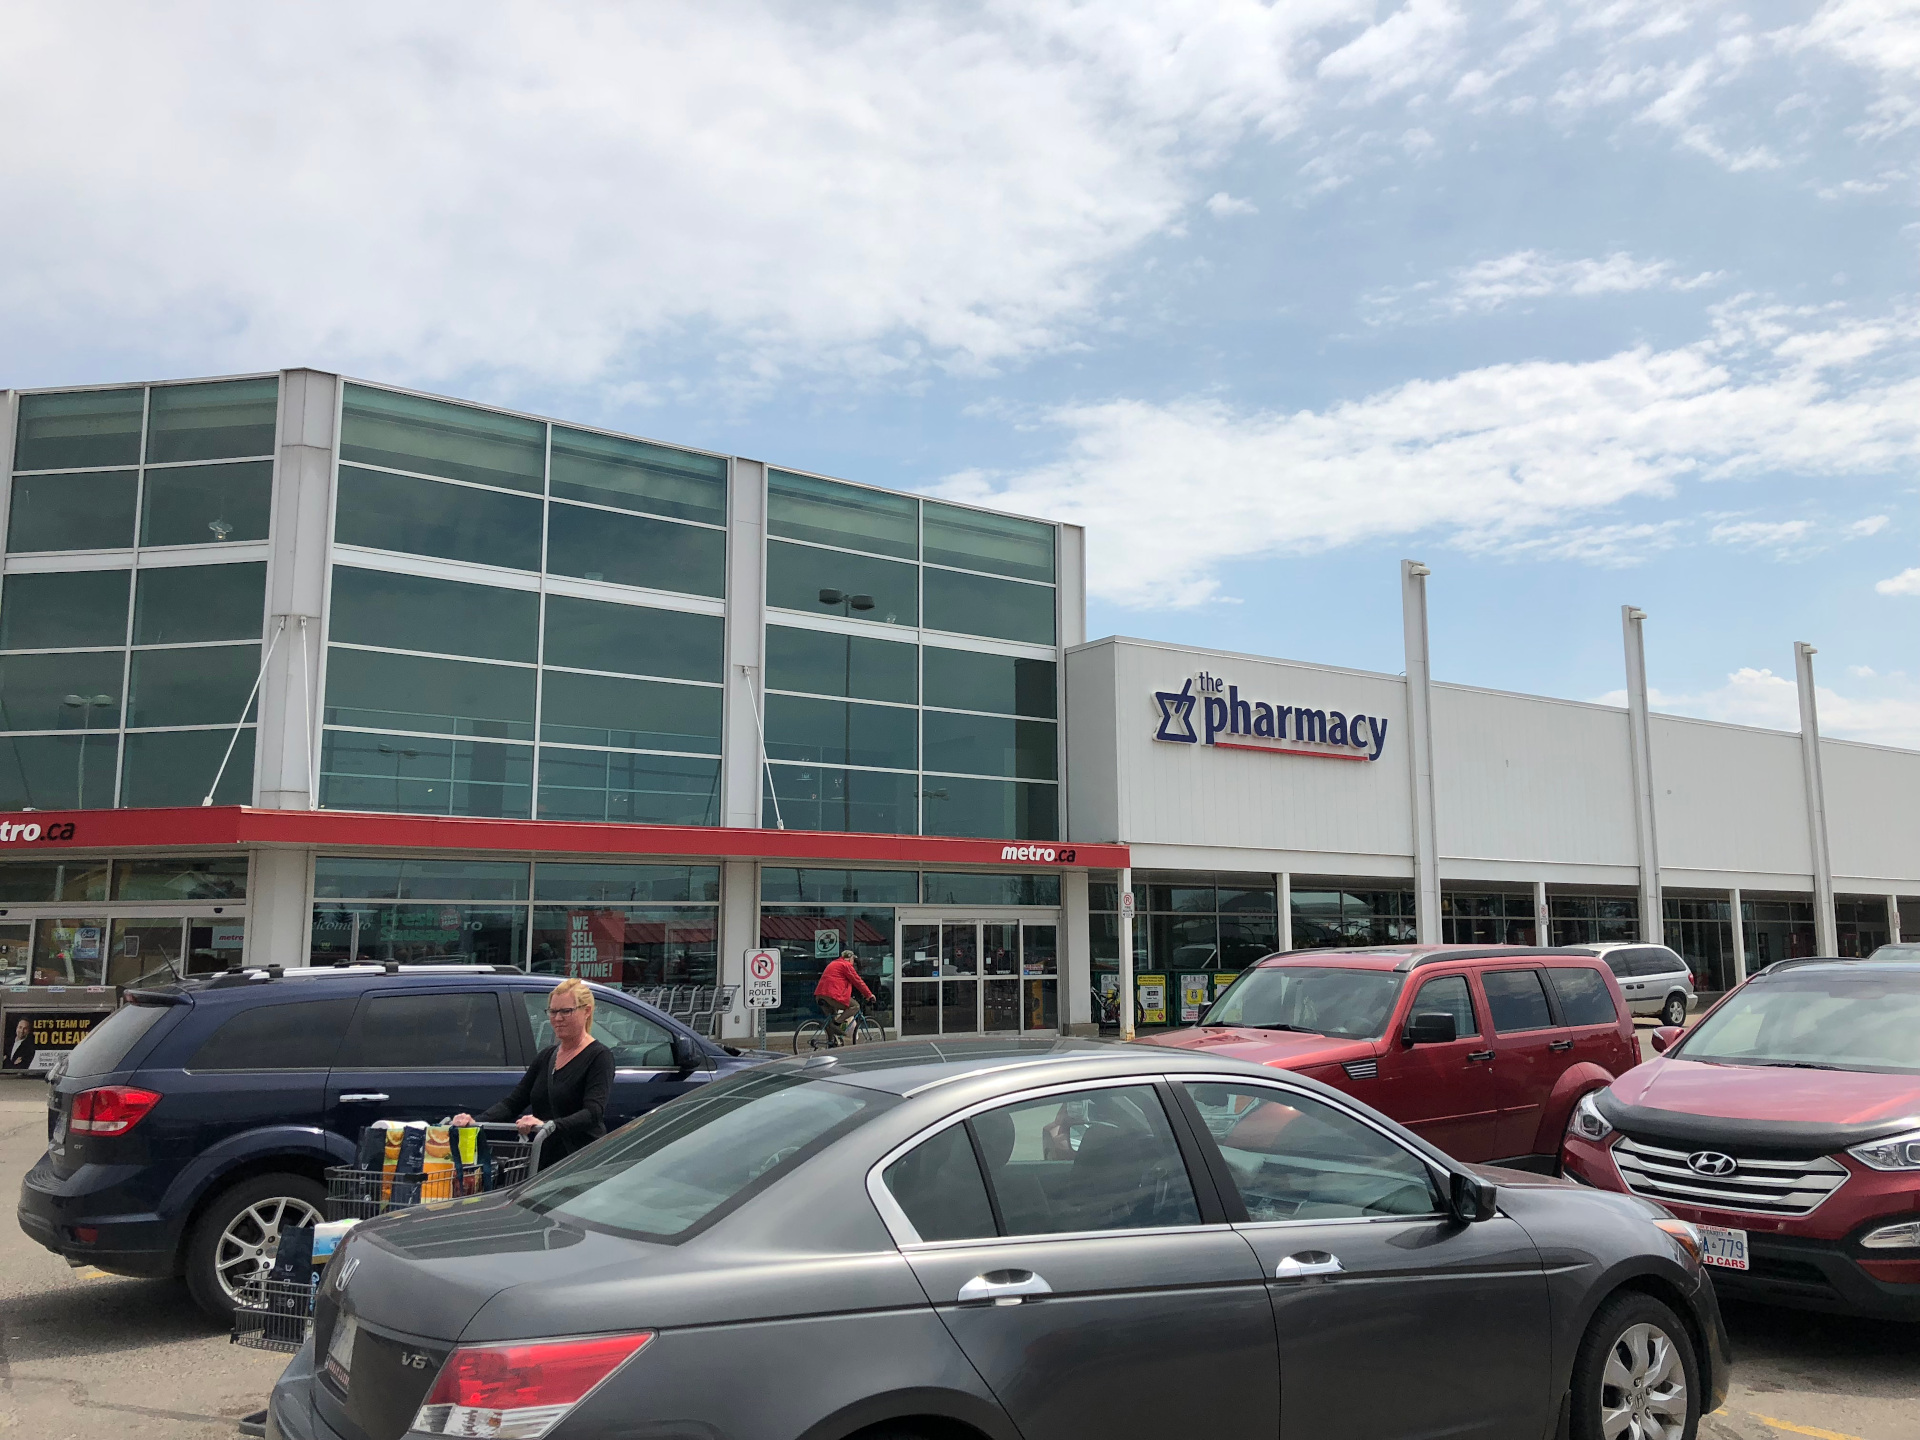 Skyline Retail REIT Acquires Additional Property in Sault Ste. Marie